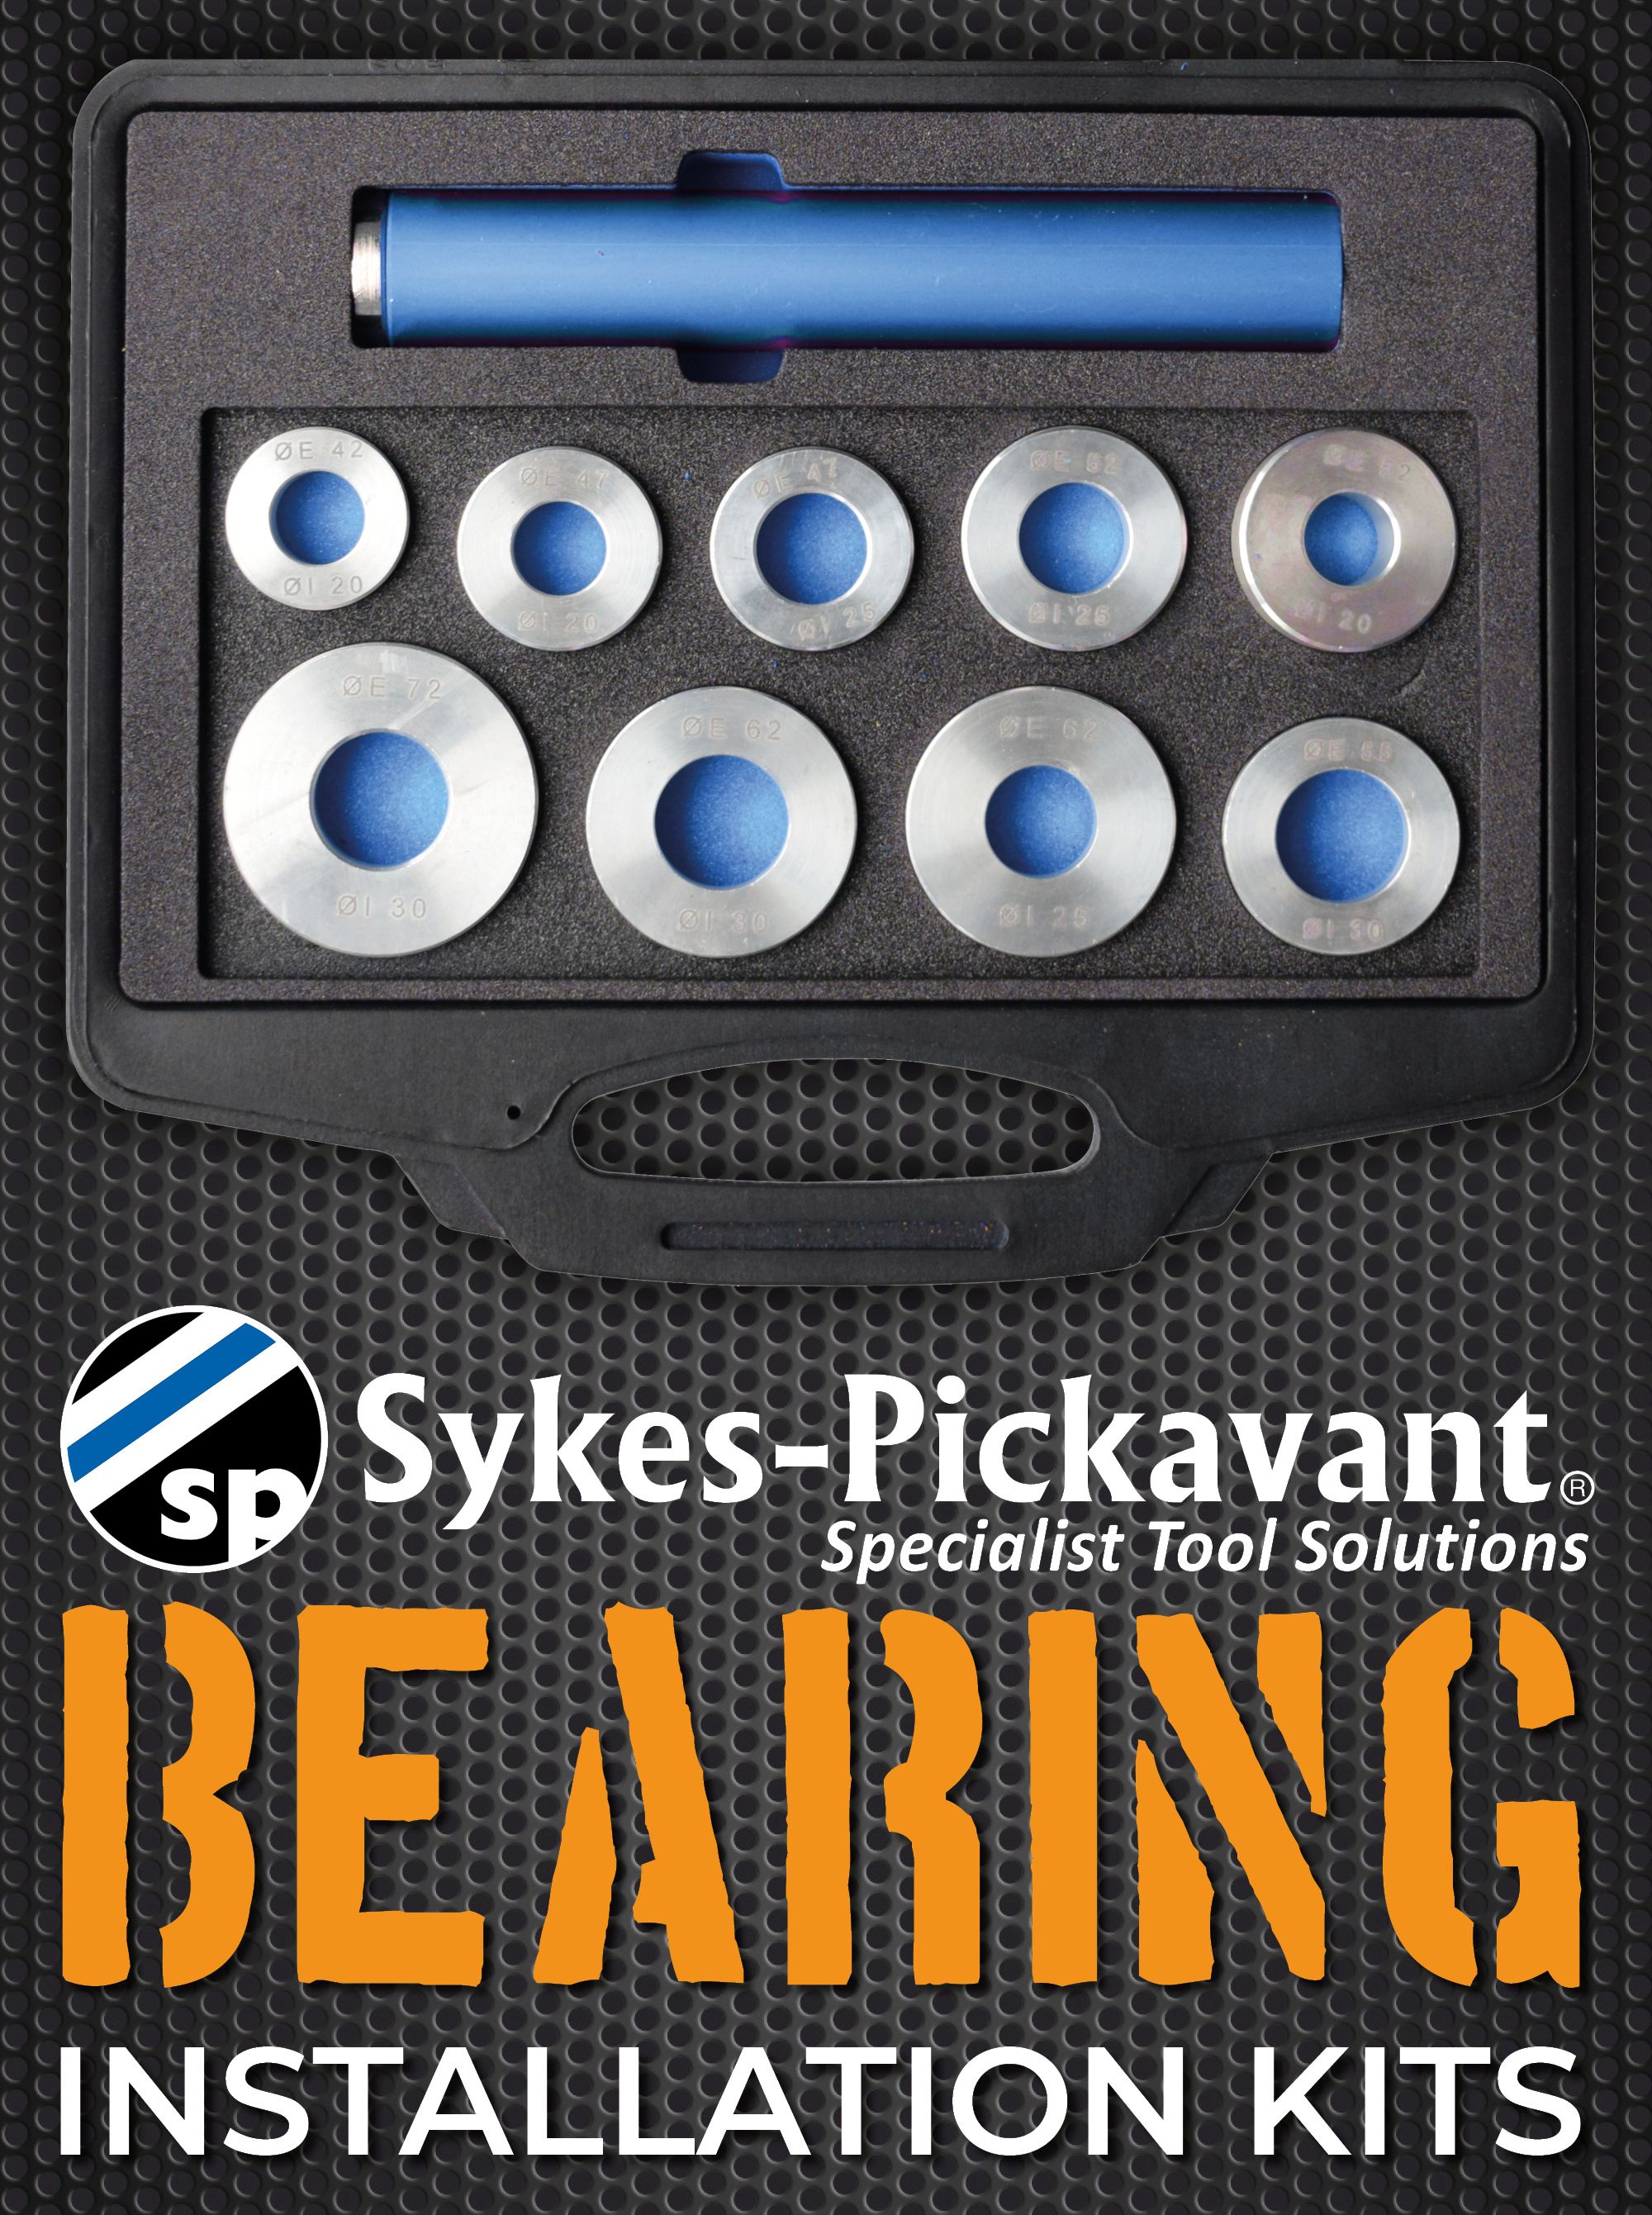 Recently Added Bearing Installation Kits from Sykes-Pickavant Provide Full Face Support, Preventing Damage and Premature Failure